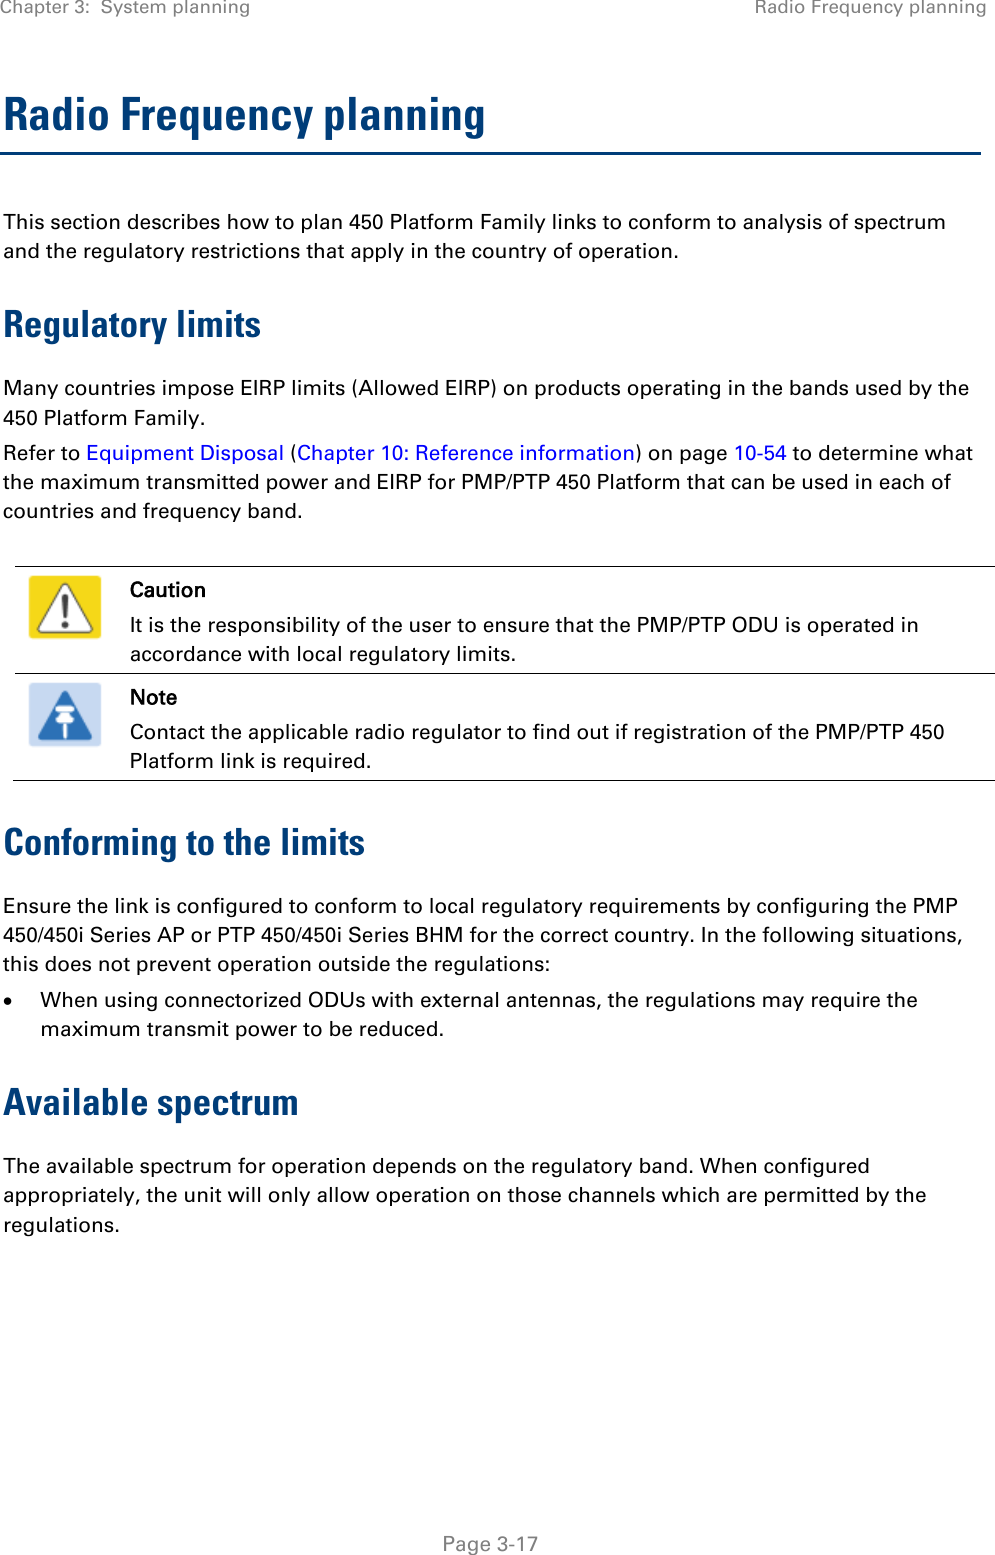 Chapter 3:  System planning Radio Frequency planning   Page 3-17 Radio Frequency planning This section describes how to plan 450 Platform Family links to conform to analysis of spectrum and the regulatory restrictions that apply in the country of operation. Regulatory limits Many countries impose EIRP limits (Allowed EIRP) on products operating in the bands used by the 450 Platform Family.  Refer to Equipment Disposal (Chapter 10: Reference information) on page 10-54 to determine what the maximum transmitted power and EIRP for PMP/PTP 450 Platform that can be used in each of countries and frequency band.   Caution It is the responsibility of the user to ensure that the PMP/PTP ODU is operated in accordance with local regulatory limits.  Note Contact the applicable radio regulator to find out if registration of the PMP/PTP 450 Platform link is required. Conforming to the limits Ensure the link is configured to conform to local regulatory requirements by configuring the PMP 450/450i Series AP or PTP 450/450i Series BHM for the correct country. In the following situations, this does not prevent operation outside the regulations: • When using connectorized ODUs with external antennas, the regulations may require the maximum transmit power to be reduced. Available spectrum The available spectrum for operation depends on the regulatory band. When configured appropriately, the unit will only allow operation on those channels which are permitted by the regulations.     